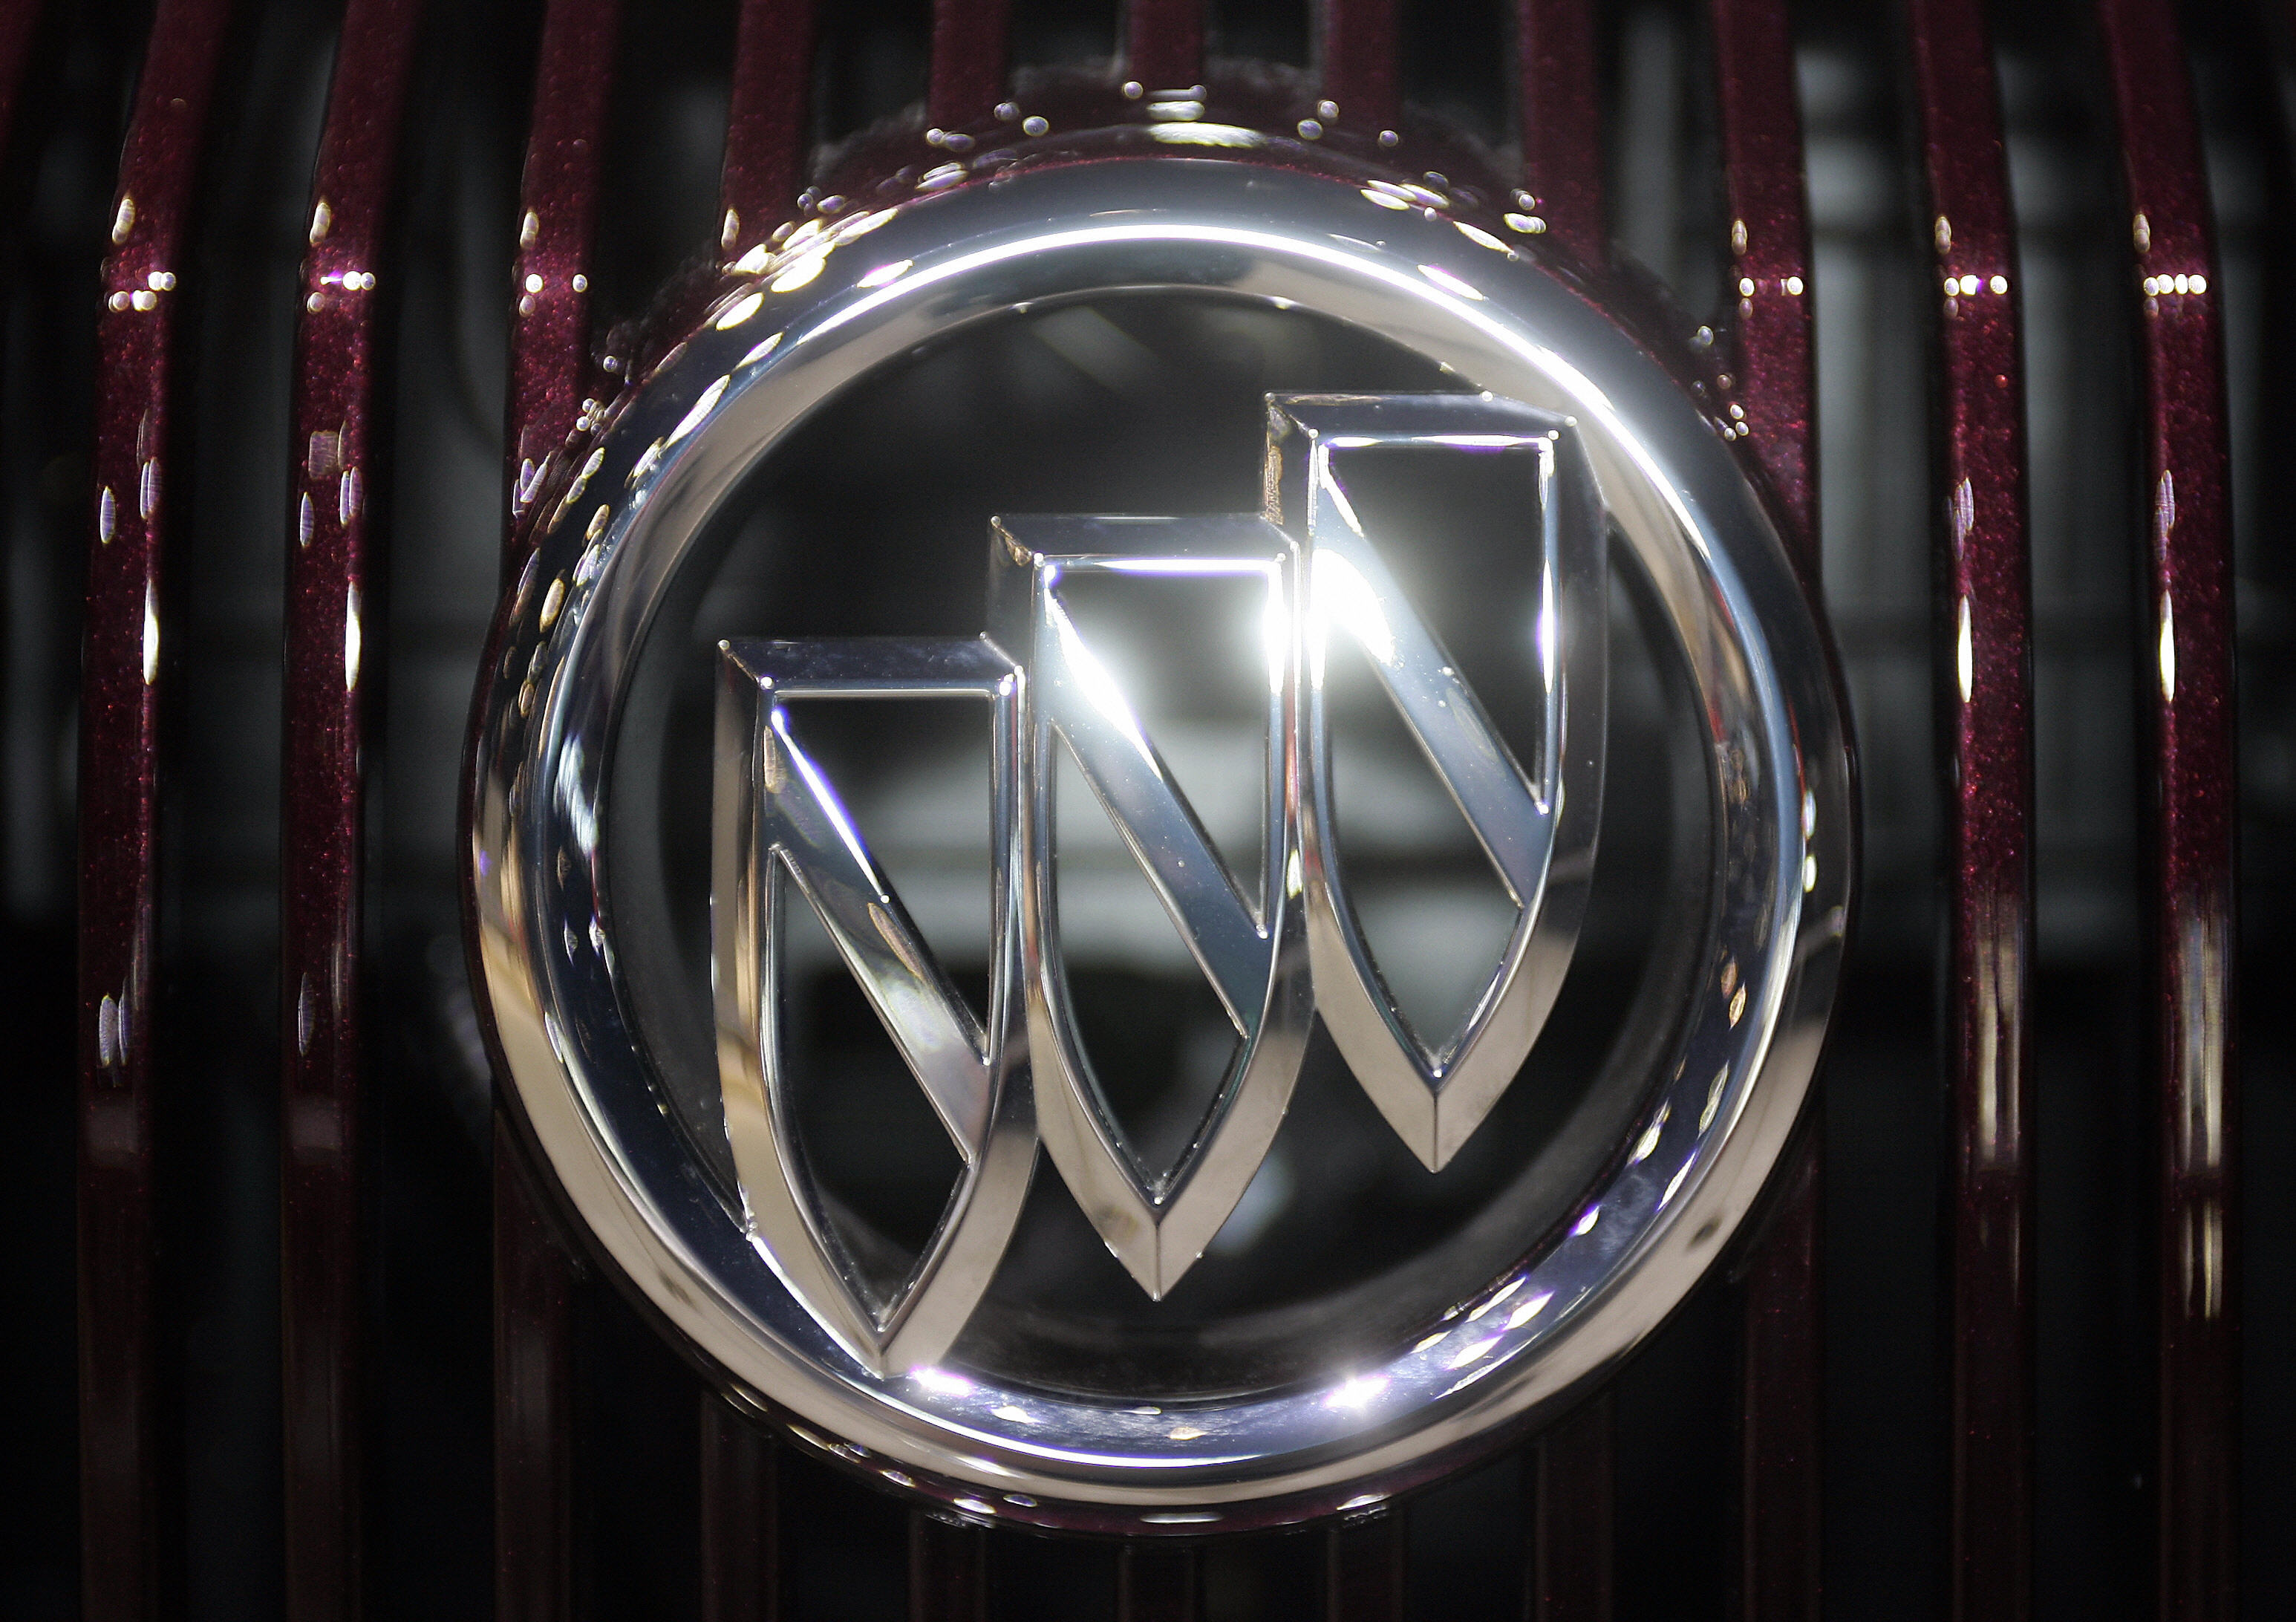 The Buick emblem on the grill of a new c